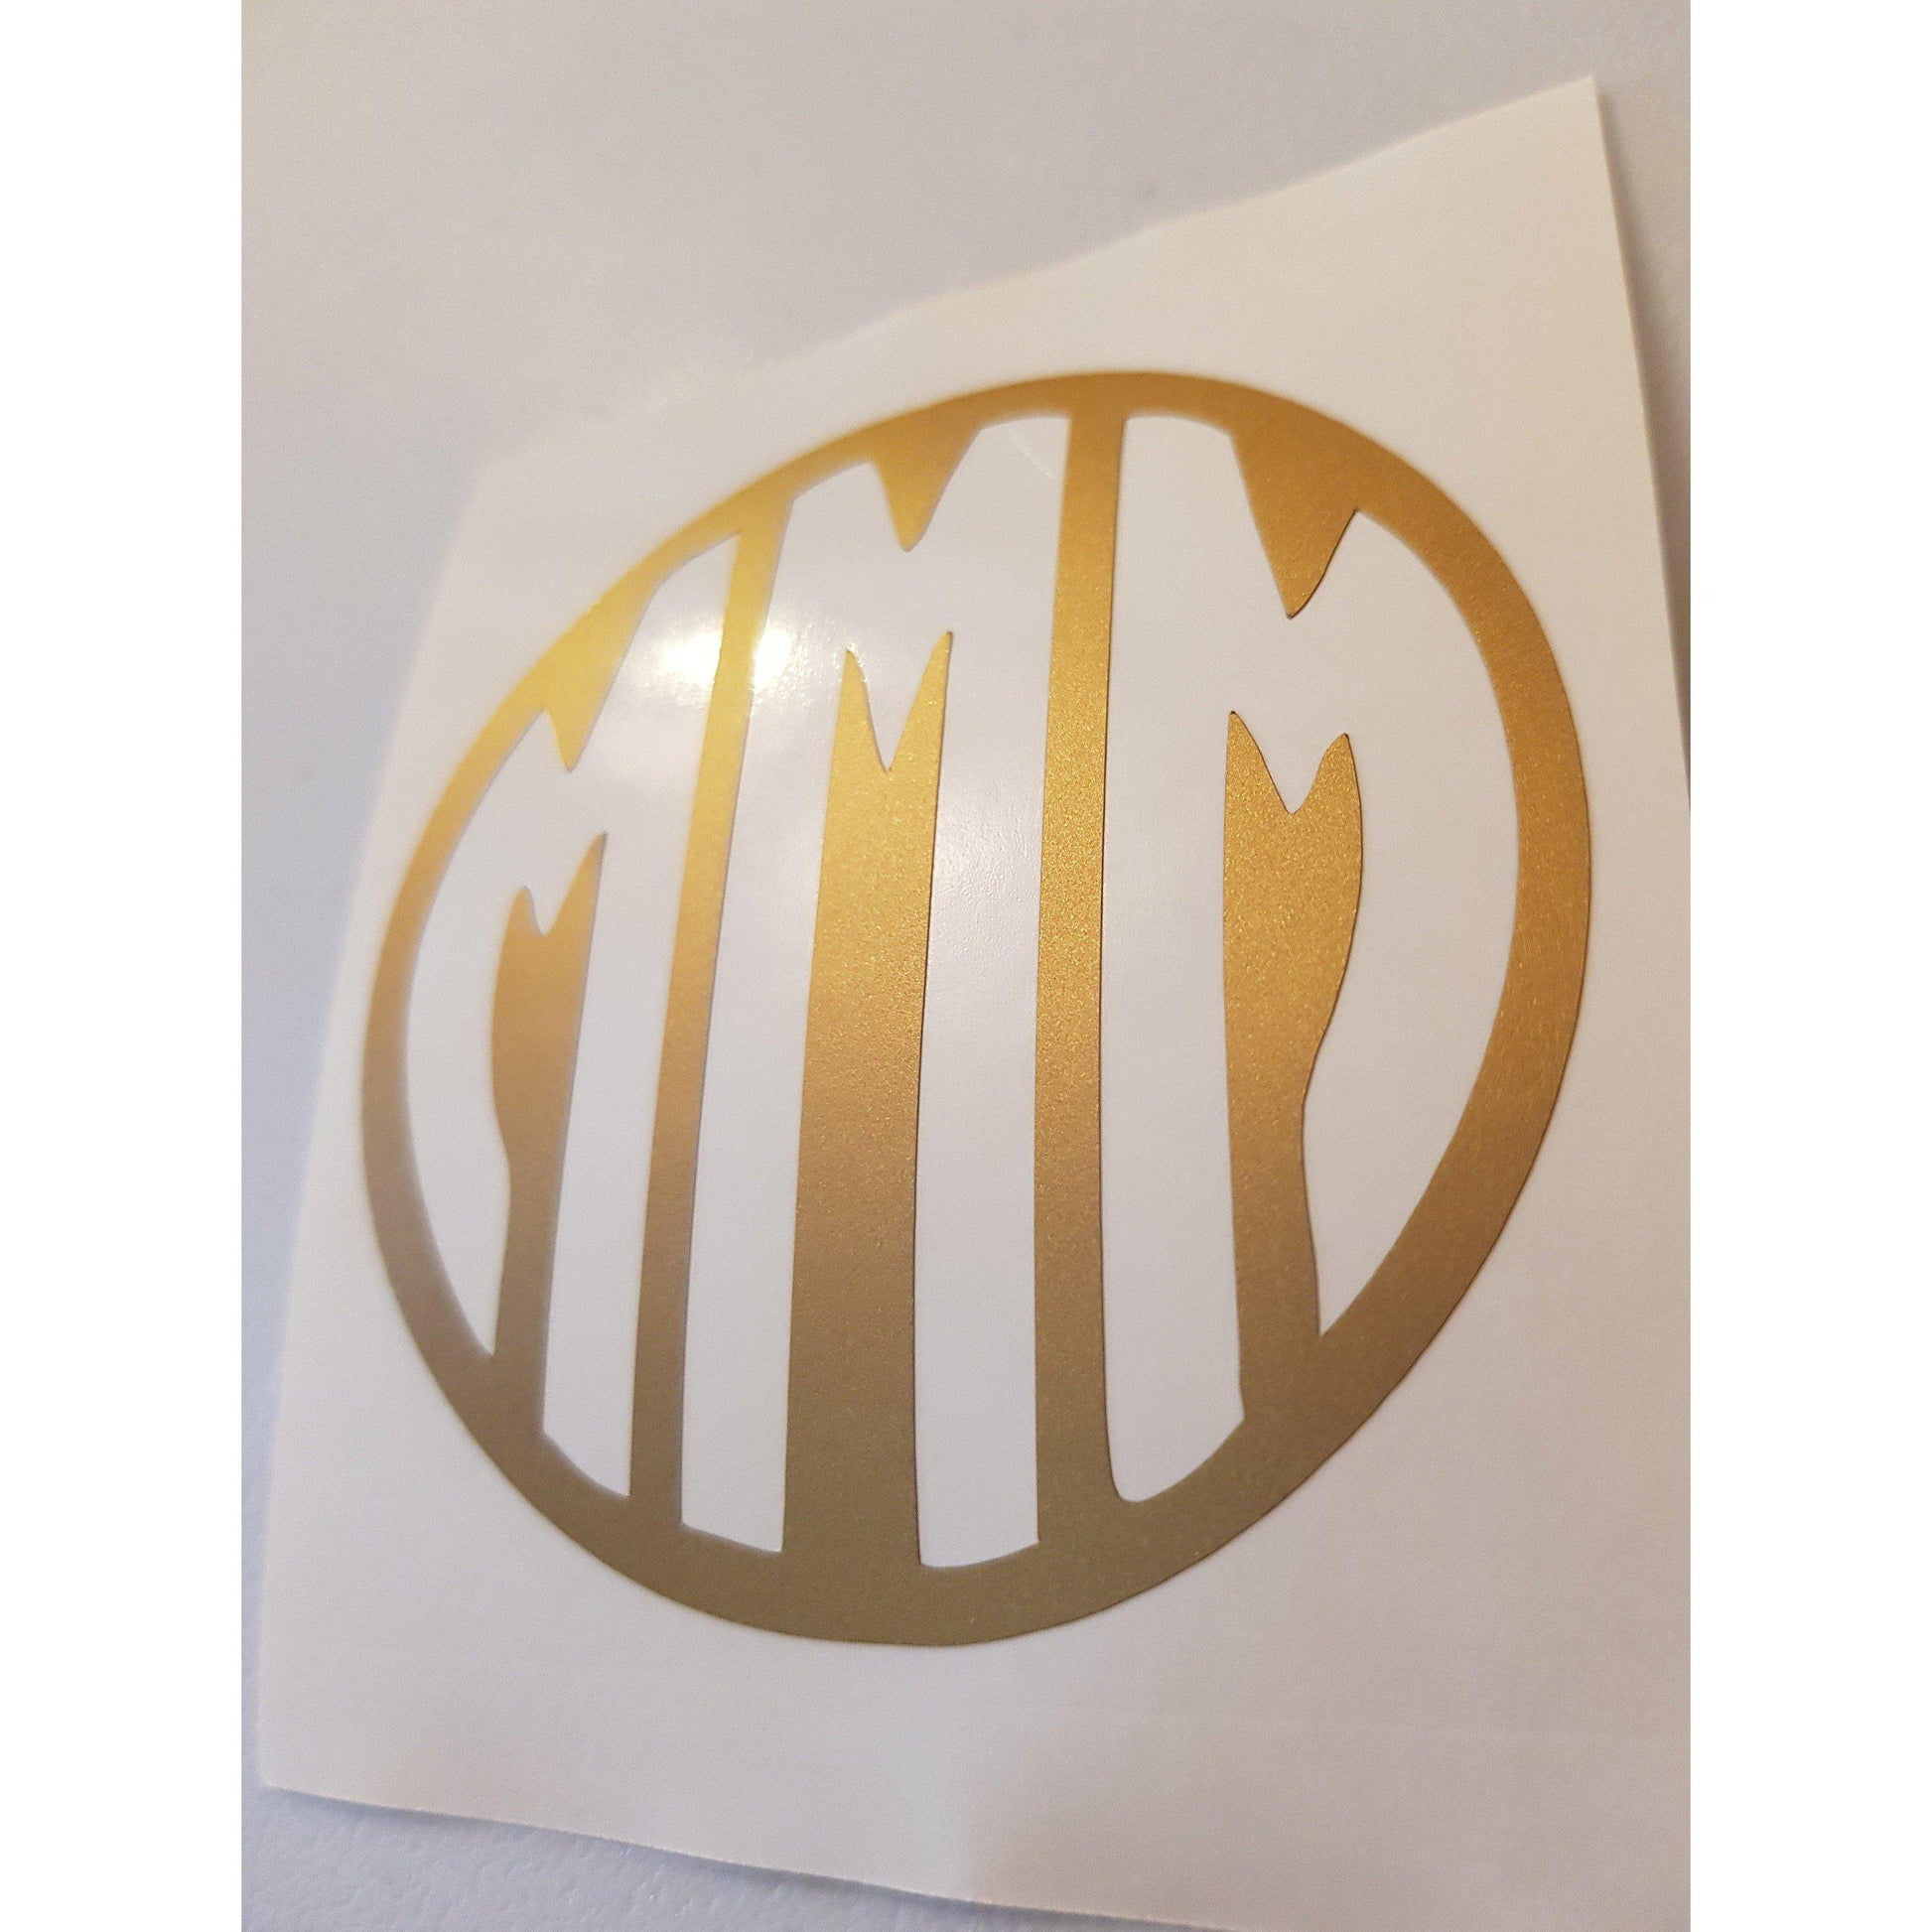 Gold Monogram Decal, Monogram Decal, Initial Decal, Custom Decal, Personalised, Initials, Gold Metallic, Bottle Decal, Tablet Decals, 077